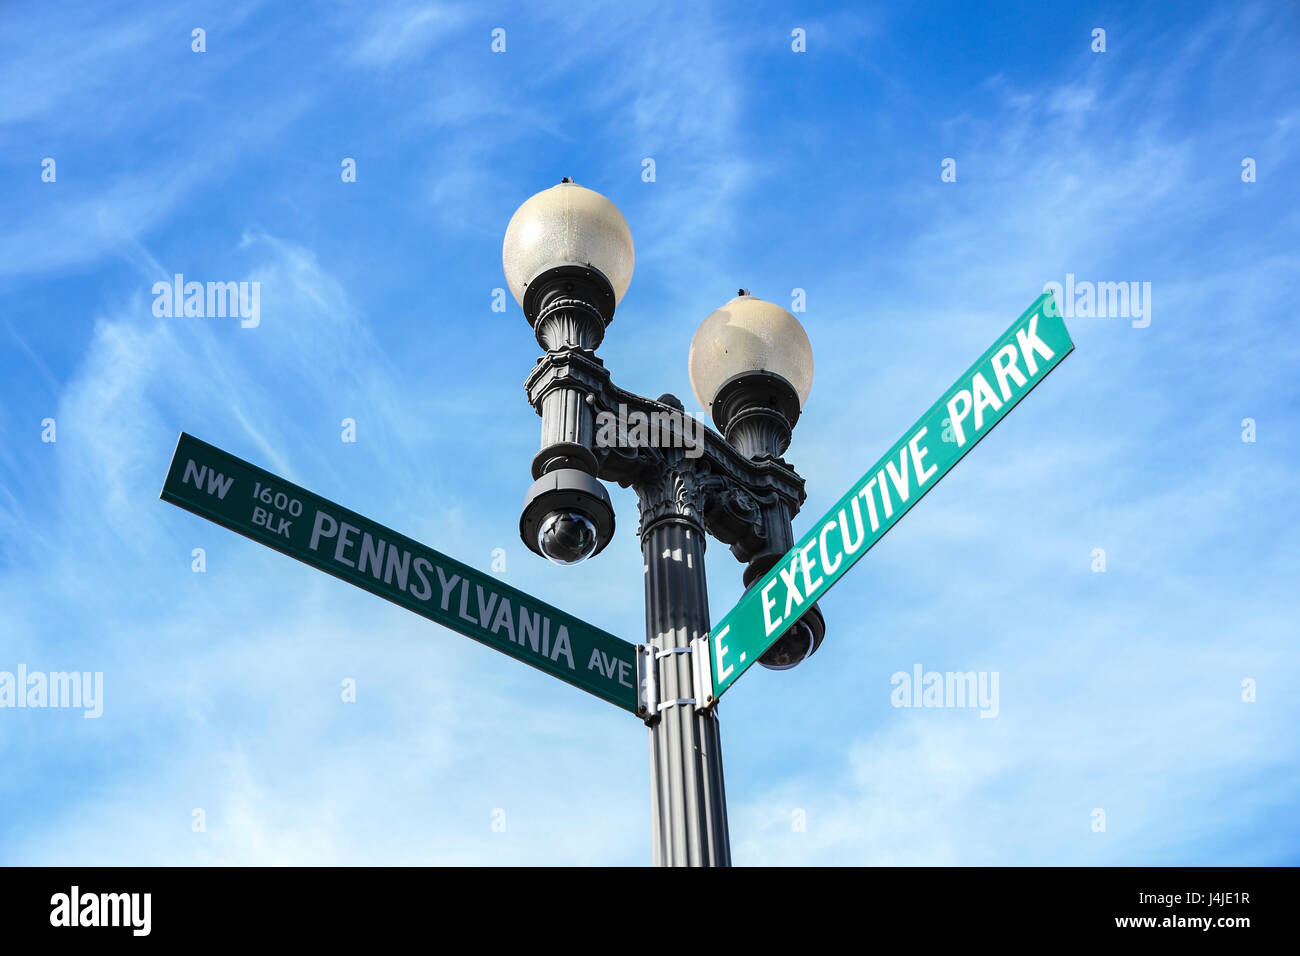 Street sign, lamp post, and security cameras in front of the White House, Washington, D.C. Stock Photo